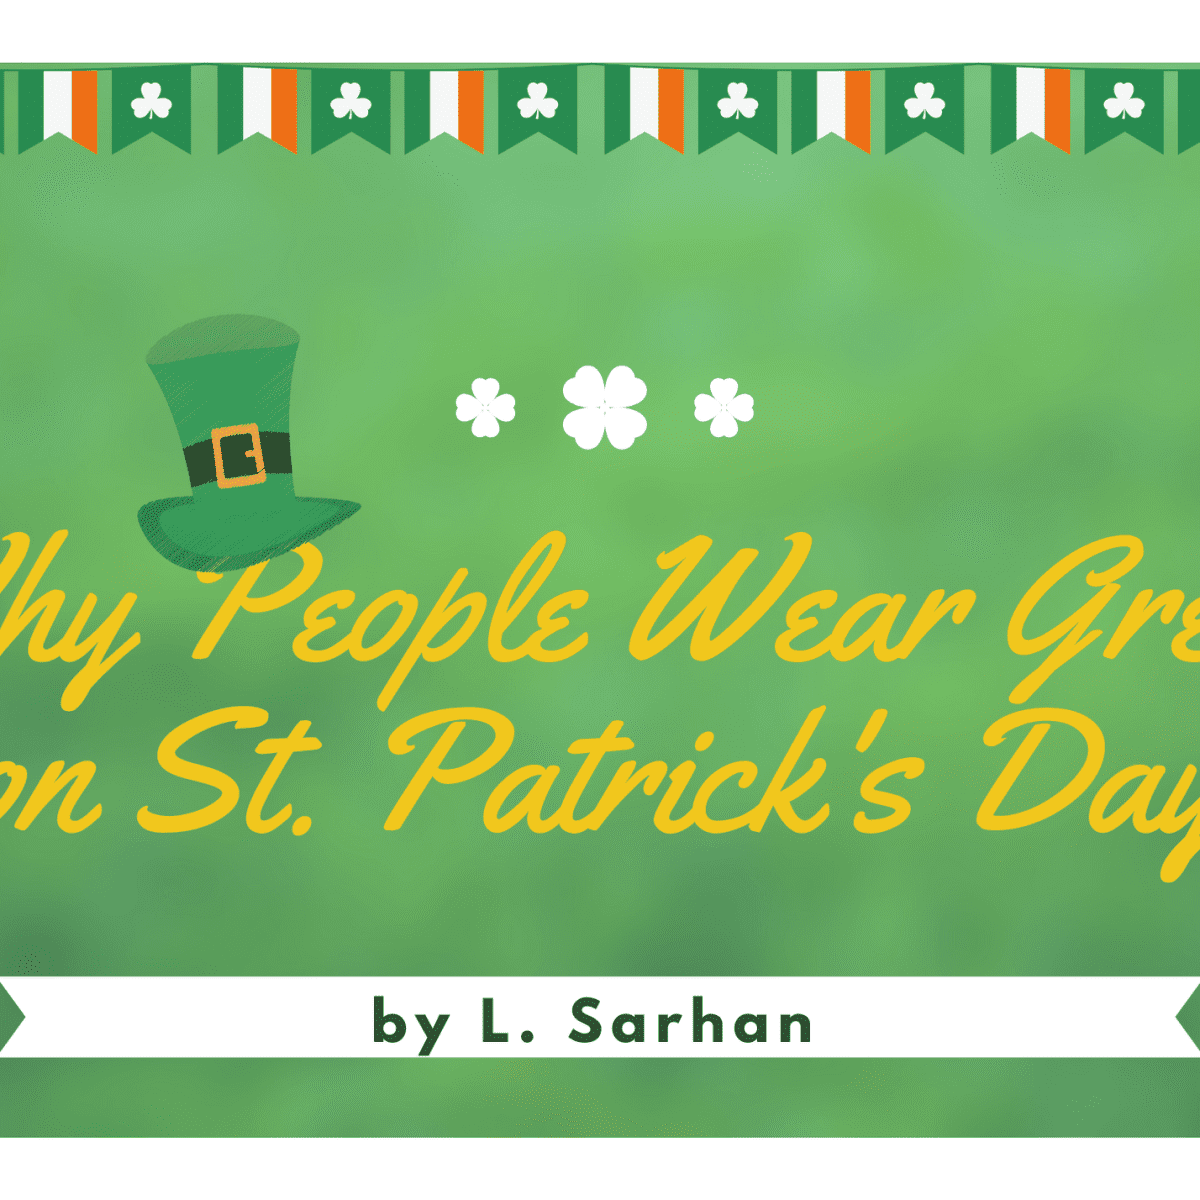 Why Do We Wear Green on St. Patrick's Day?